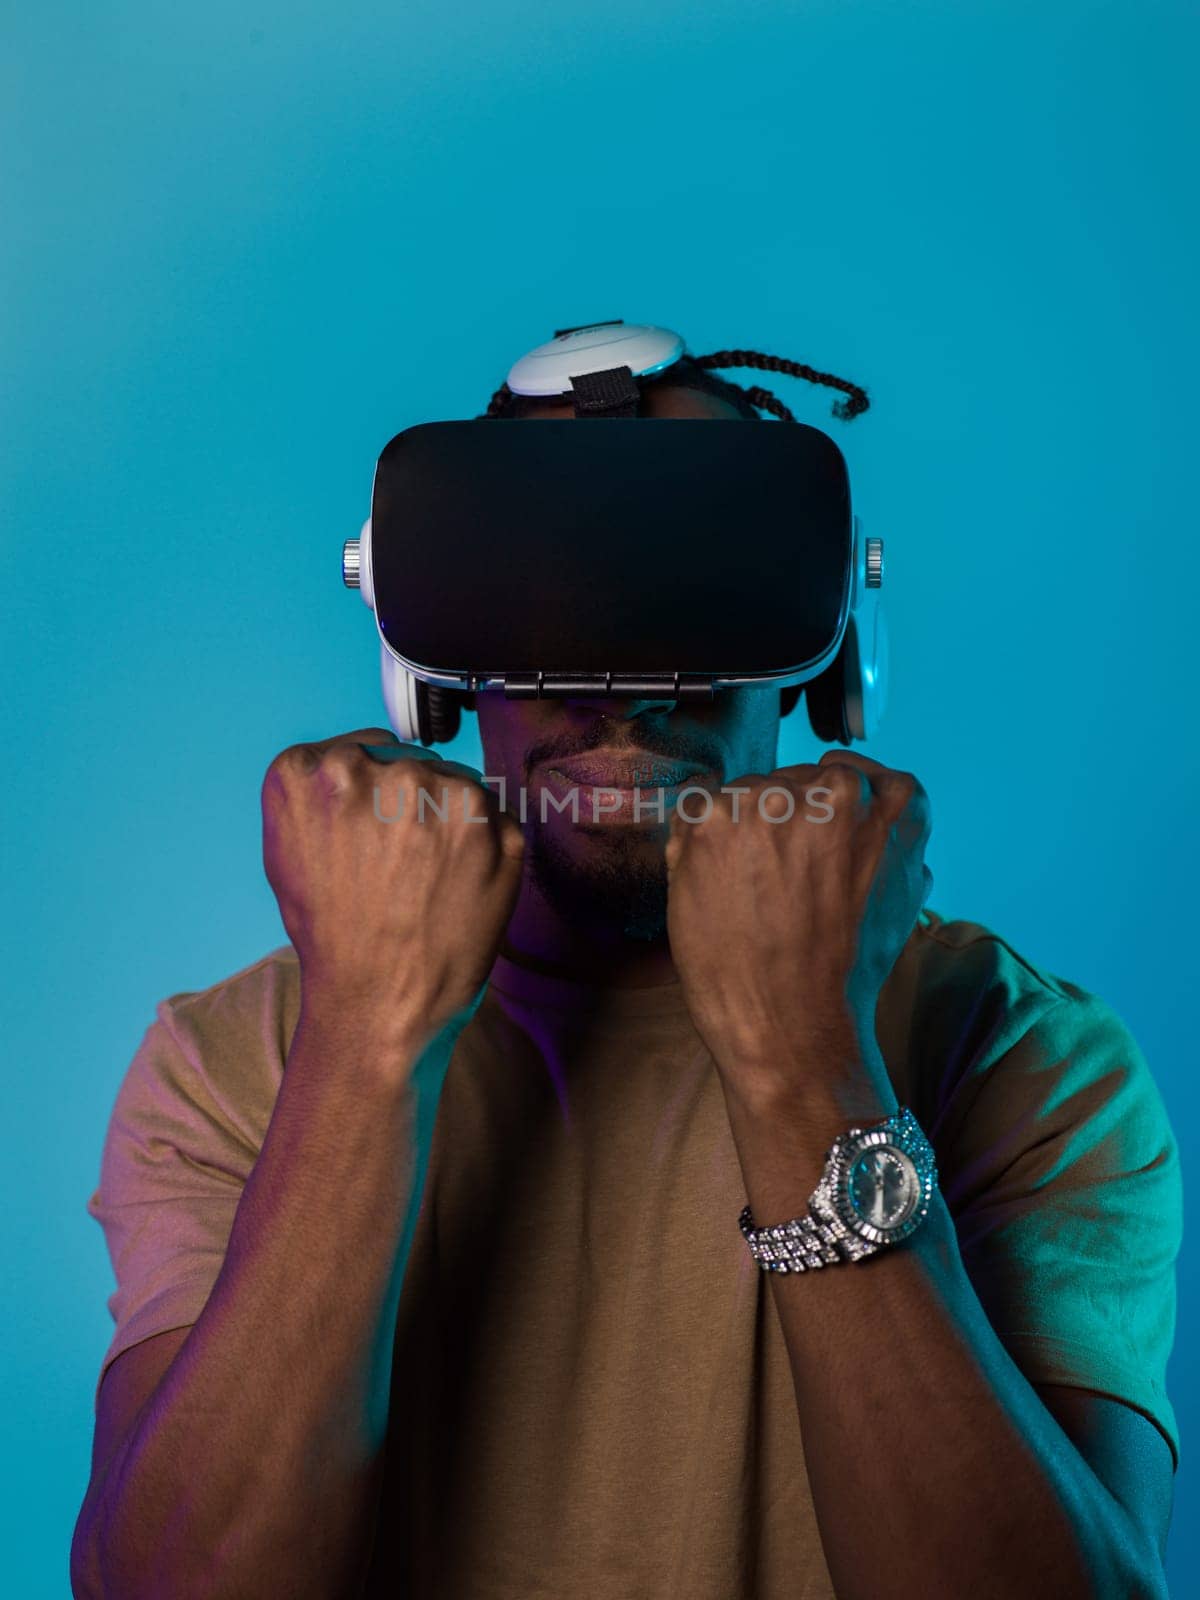 In an avant-garde scene, an African American man engages in cutting-edge virtual reality gaming, utilizing VR glasses to immerse himself in futuristic boxing games, set against a vivid blue background, showcasing the seamless fusion of technology, innovation, and interactive entertainment.